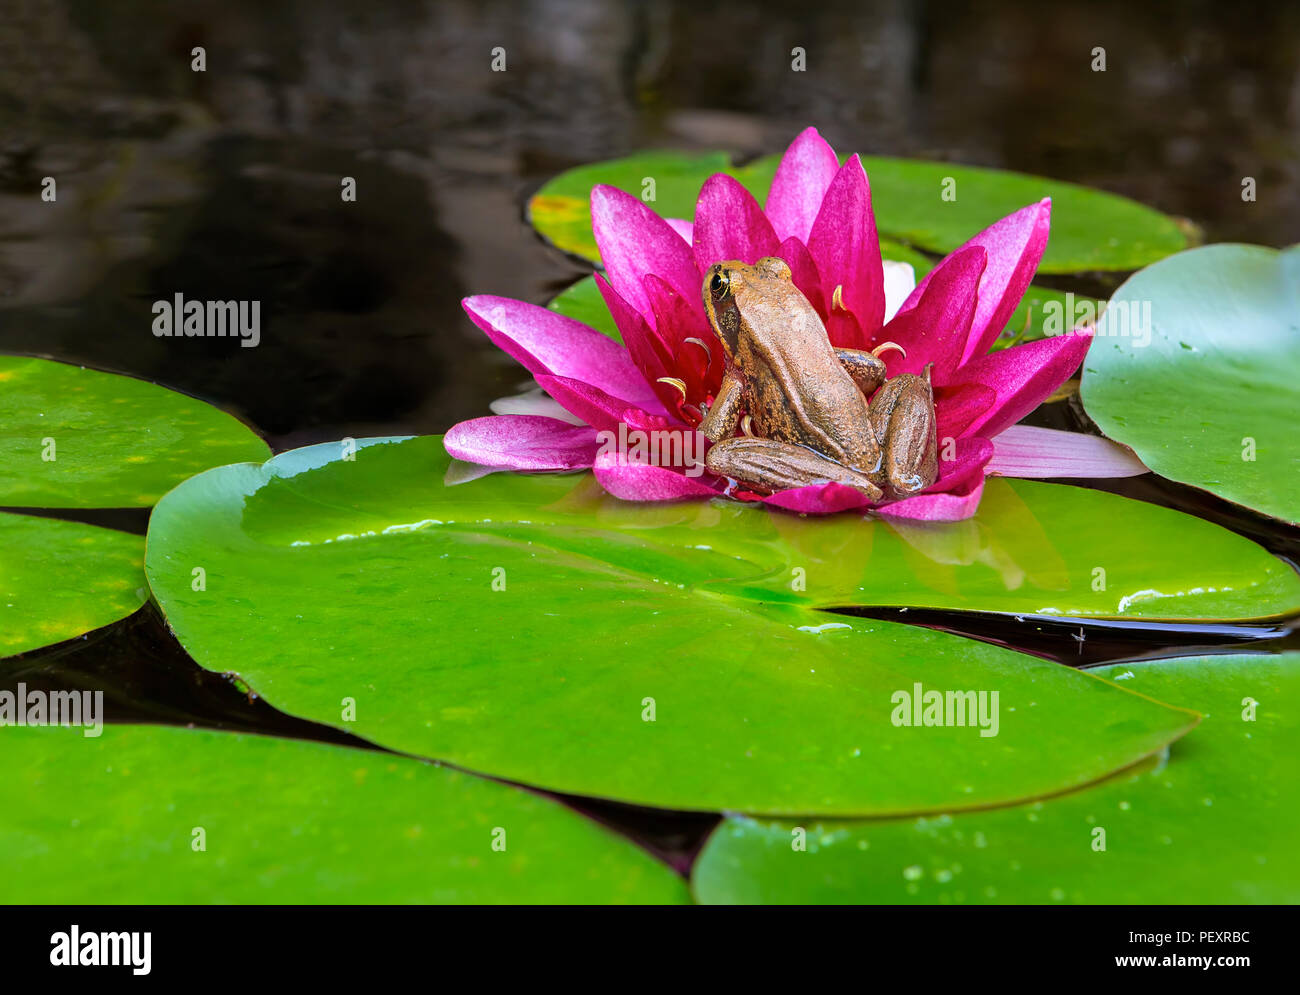 Pacific Chorus Tree Frog sitting on pink Water Lily Flower igarden backyard pond Stock Photo